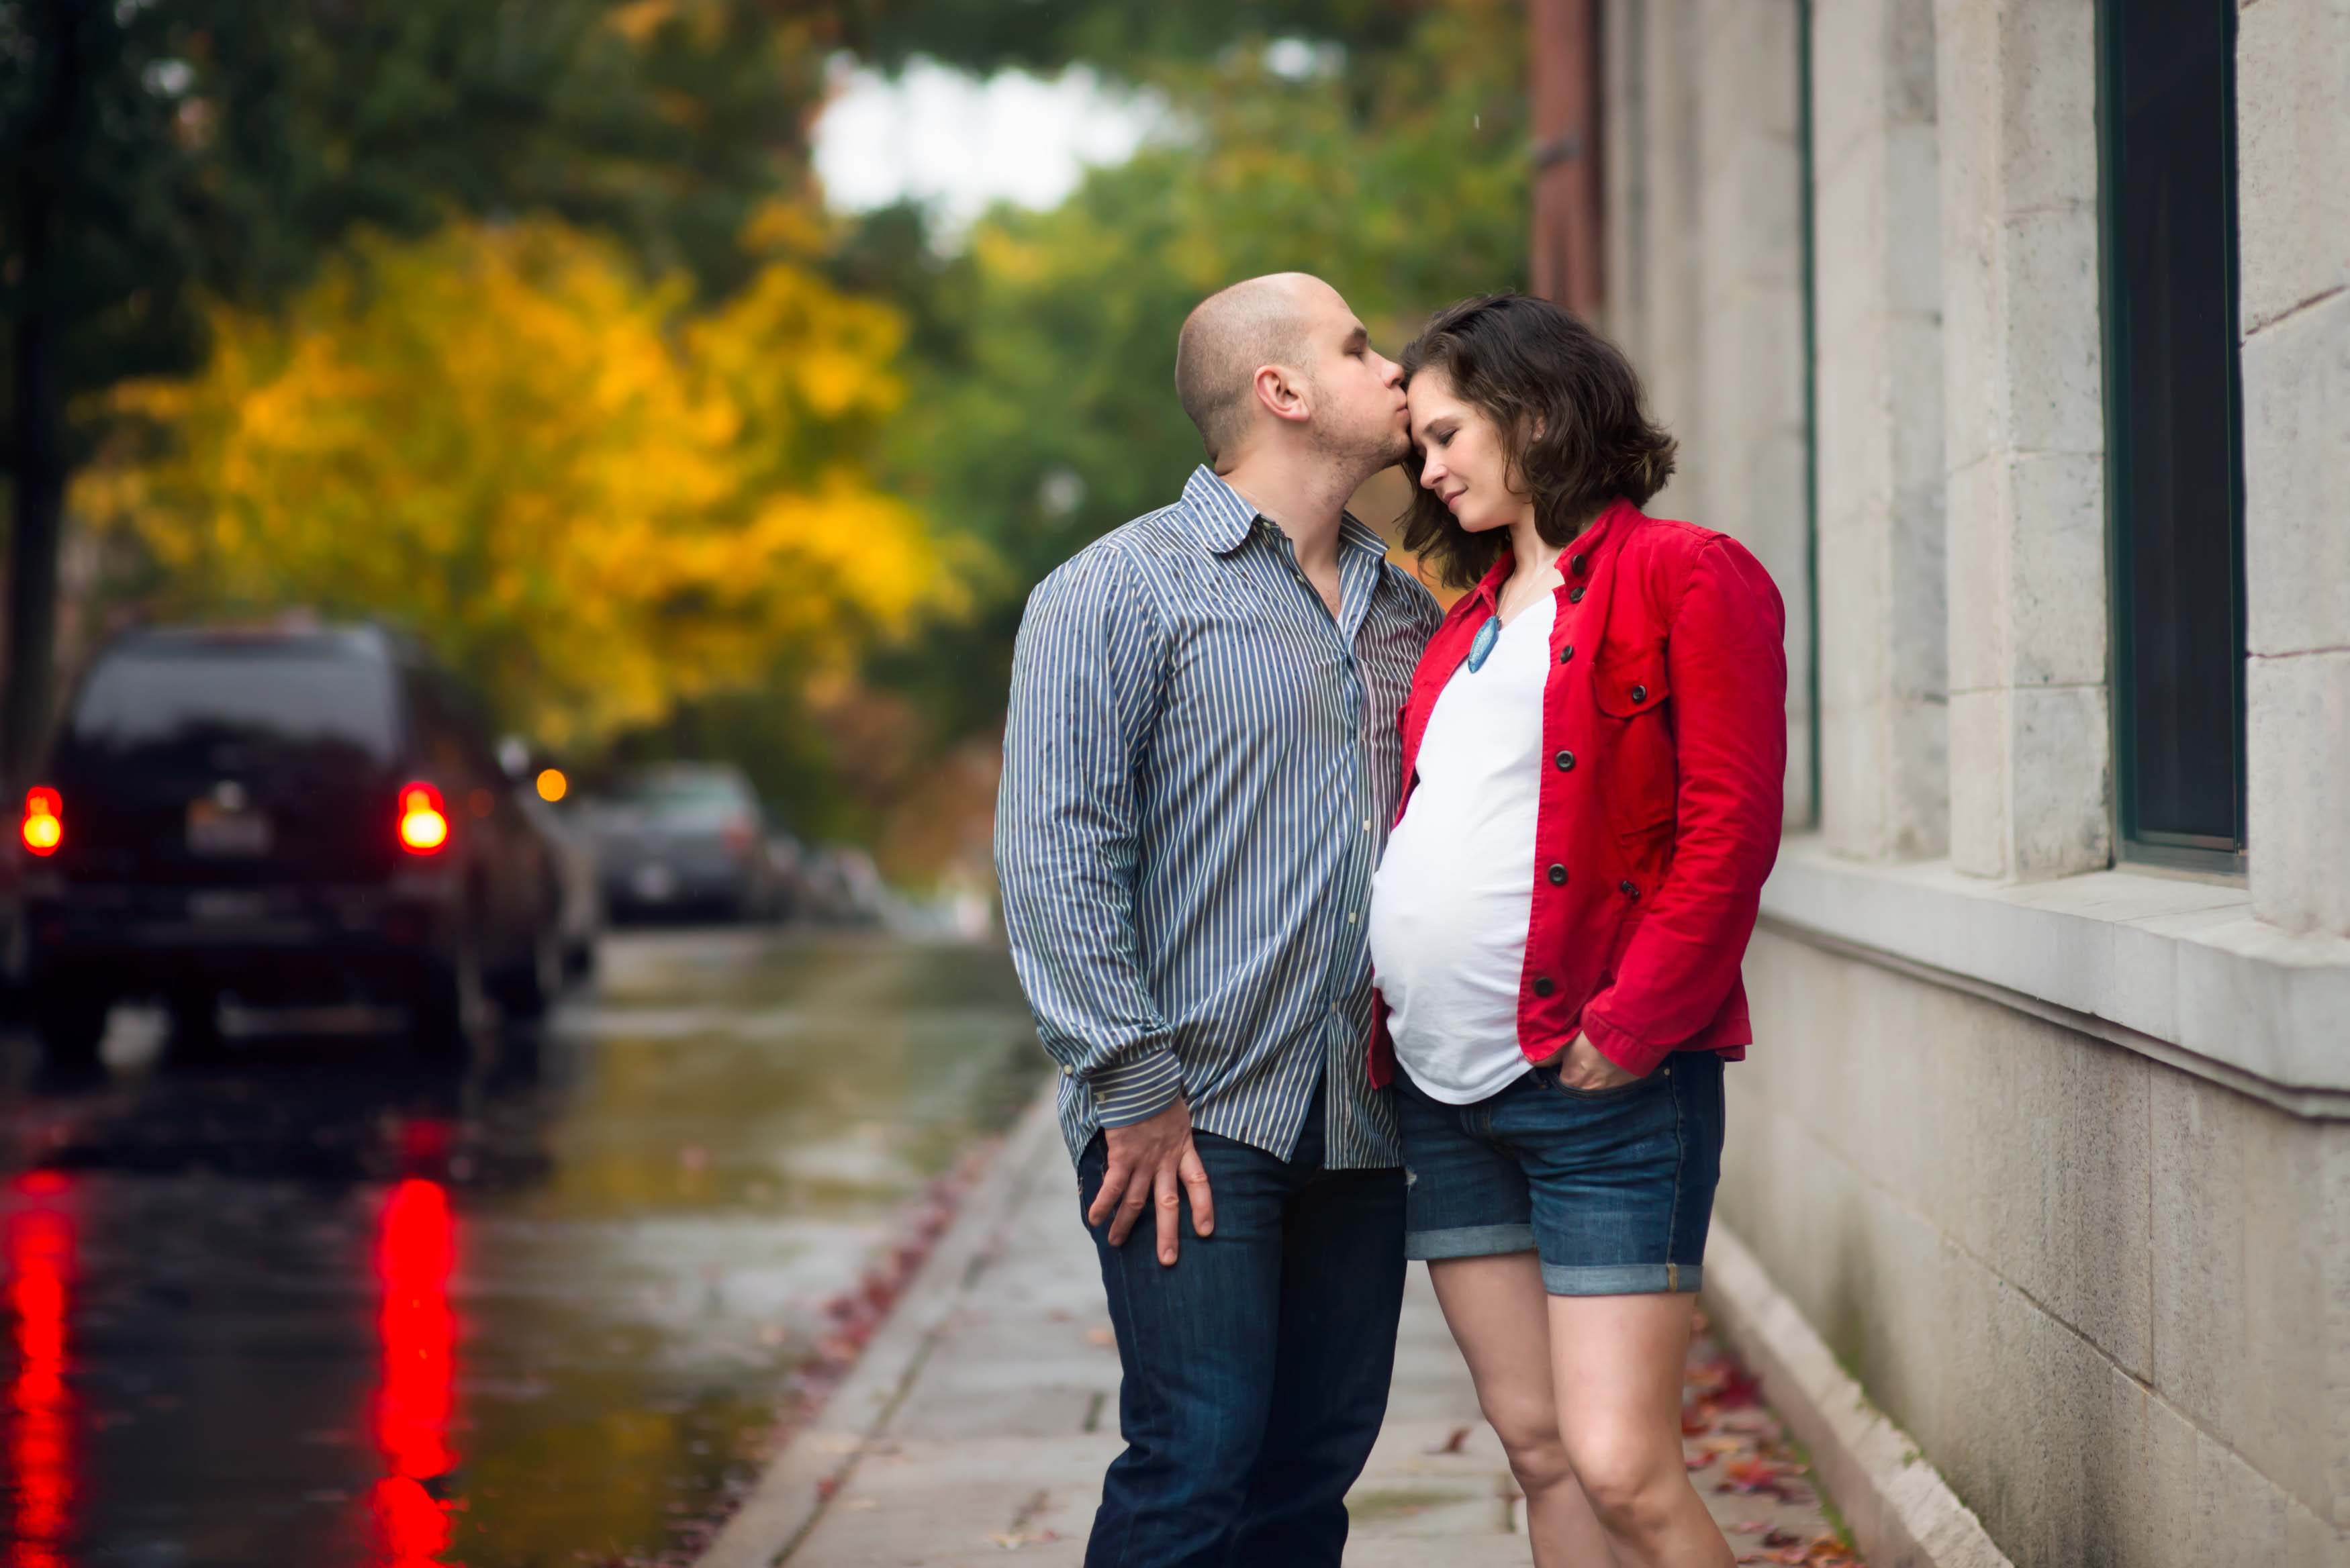 Maternity photo session in downtown Asheville.